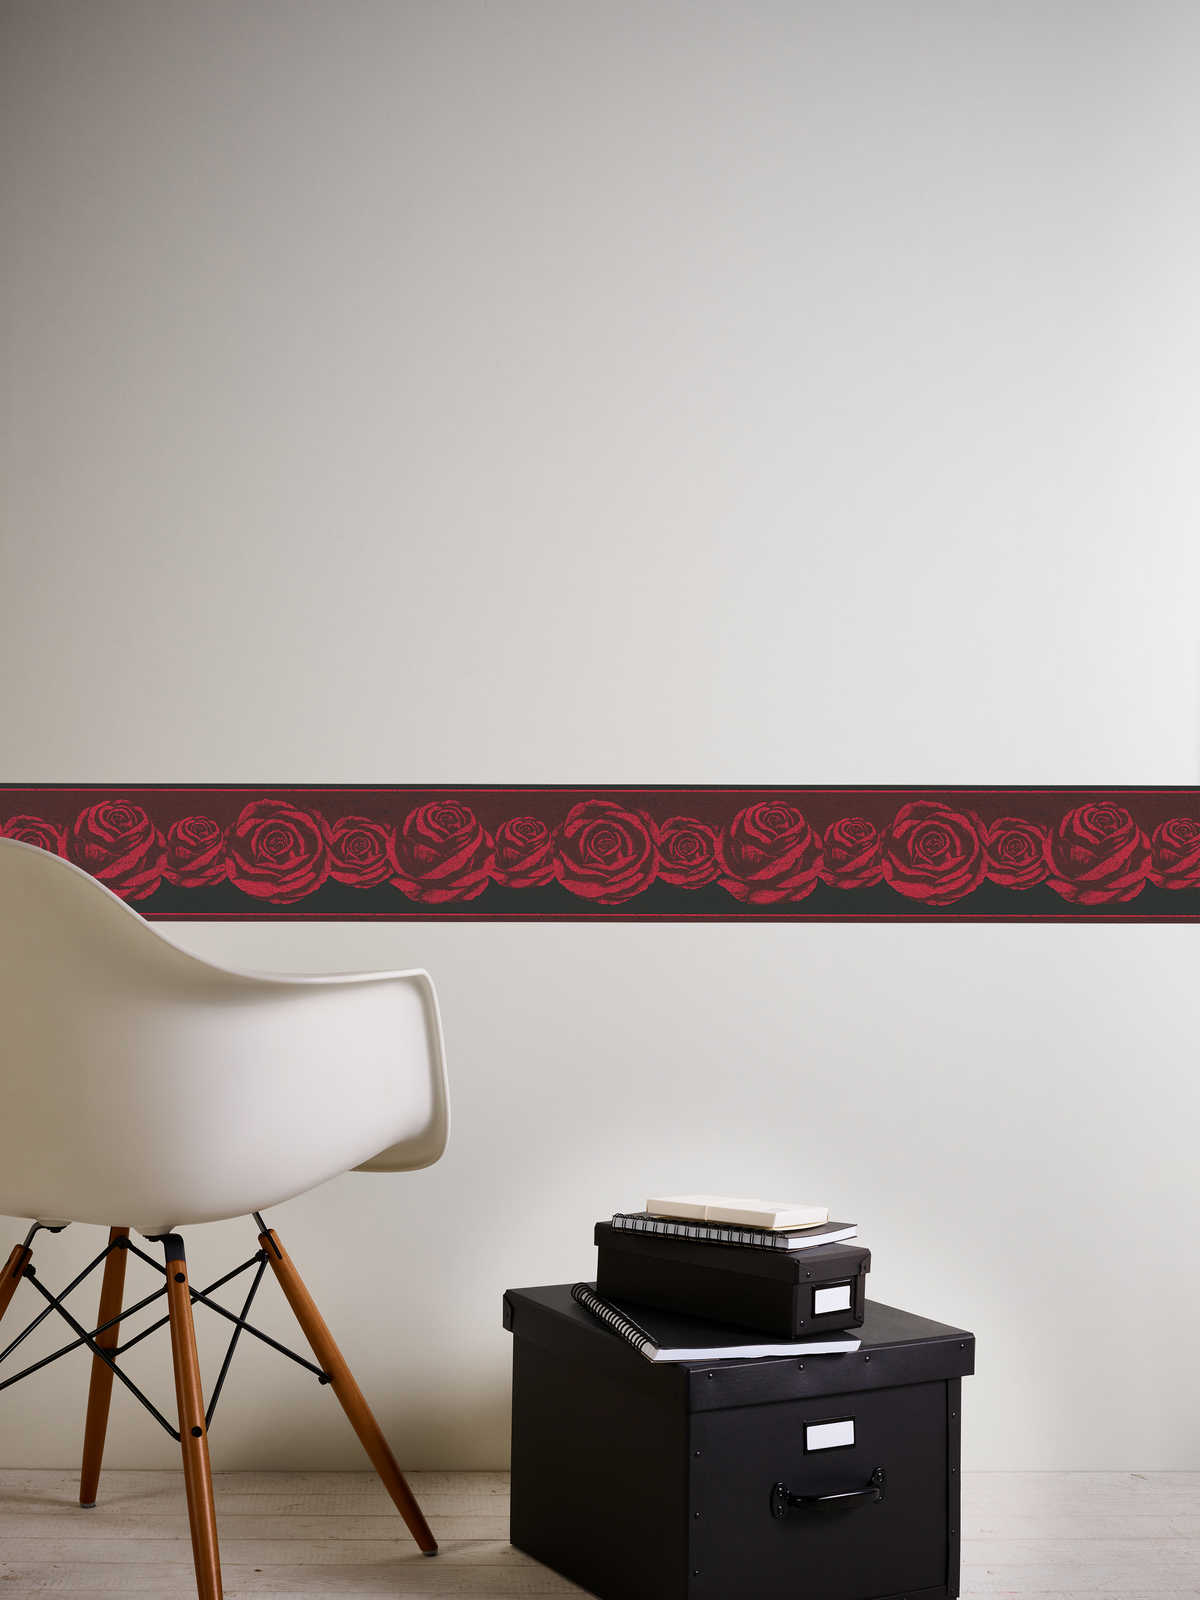             Wallpaper border black and red with roses pattern
        